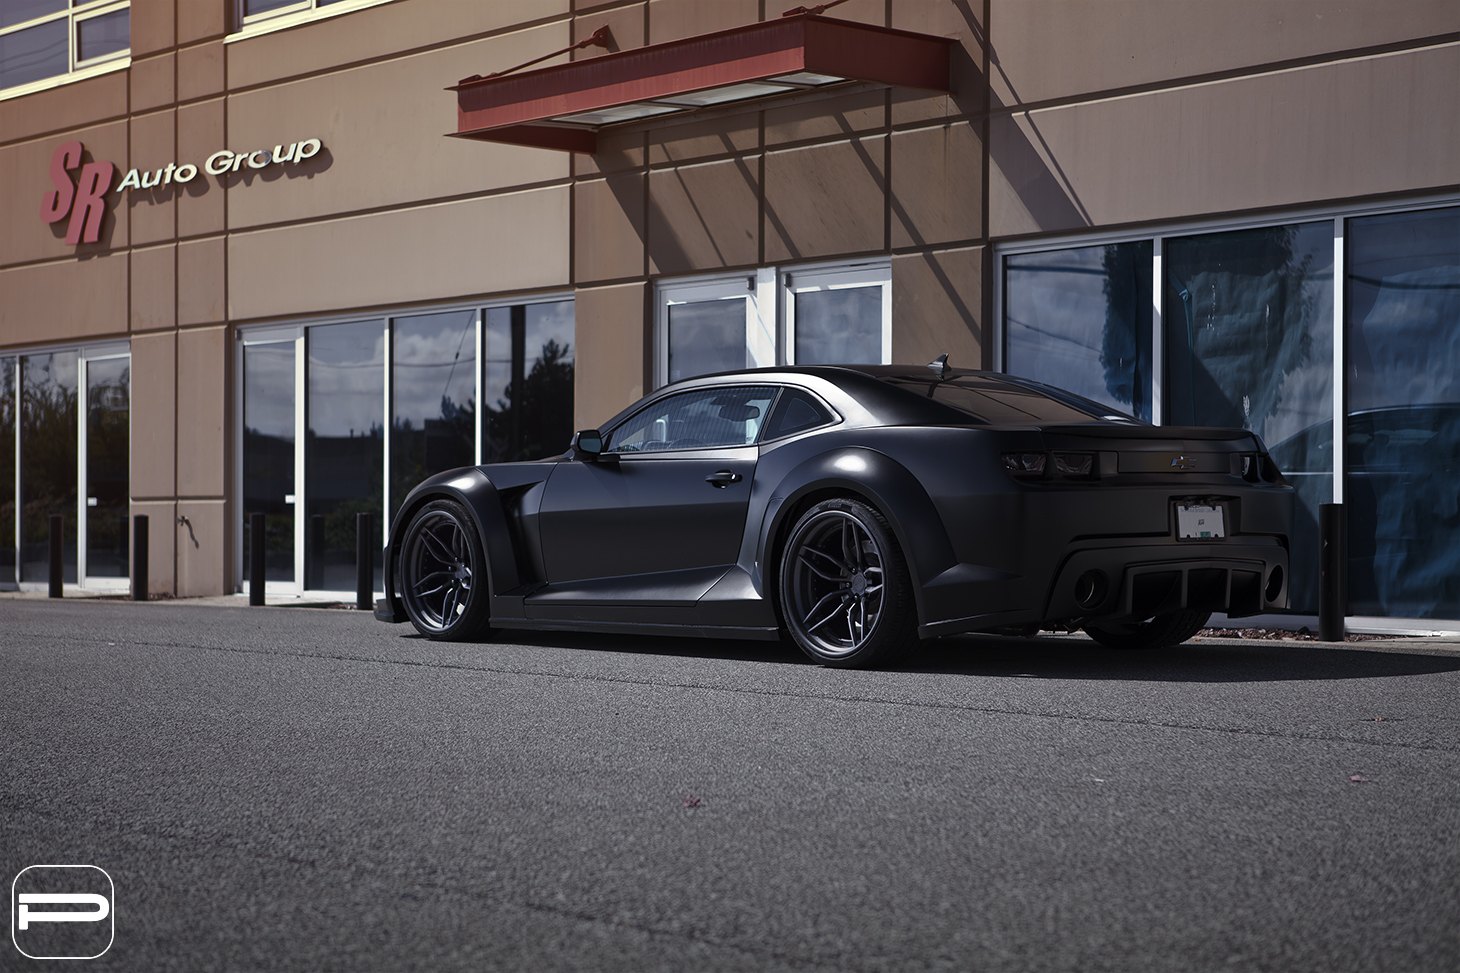 Aftermarket Side Skirts on Black Matte Chevy Camaro - Photo by PUR Wheels